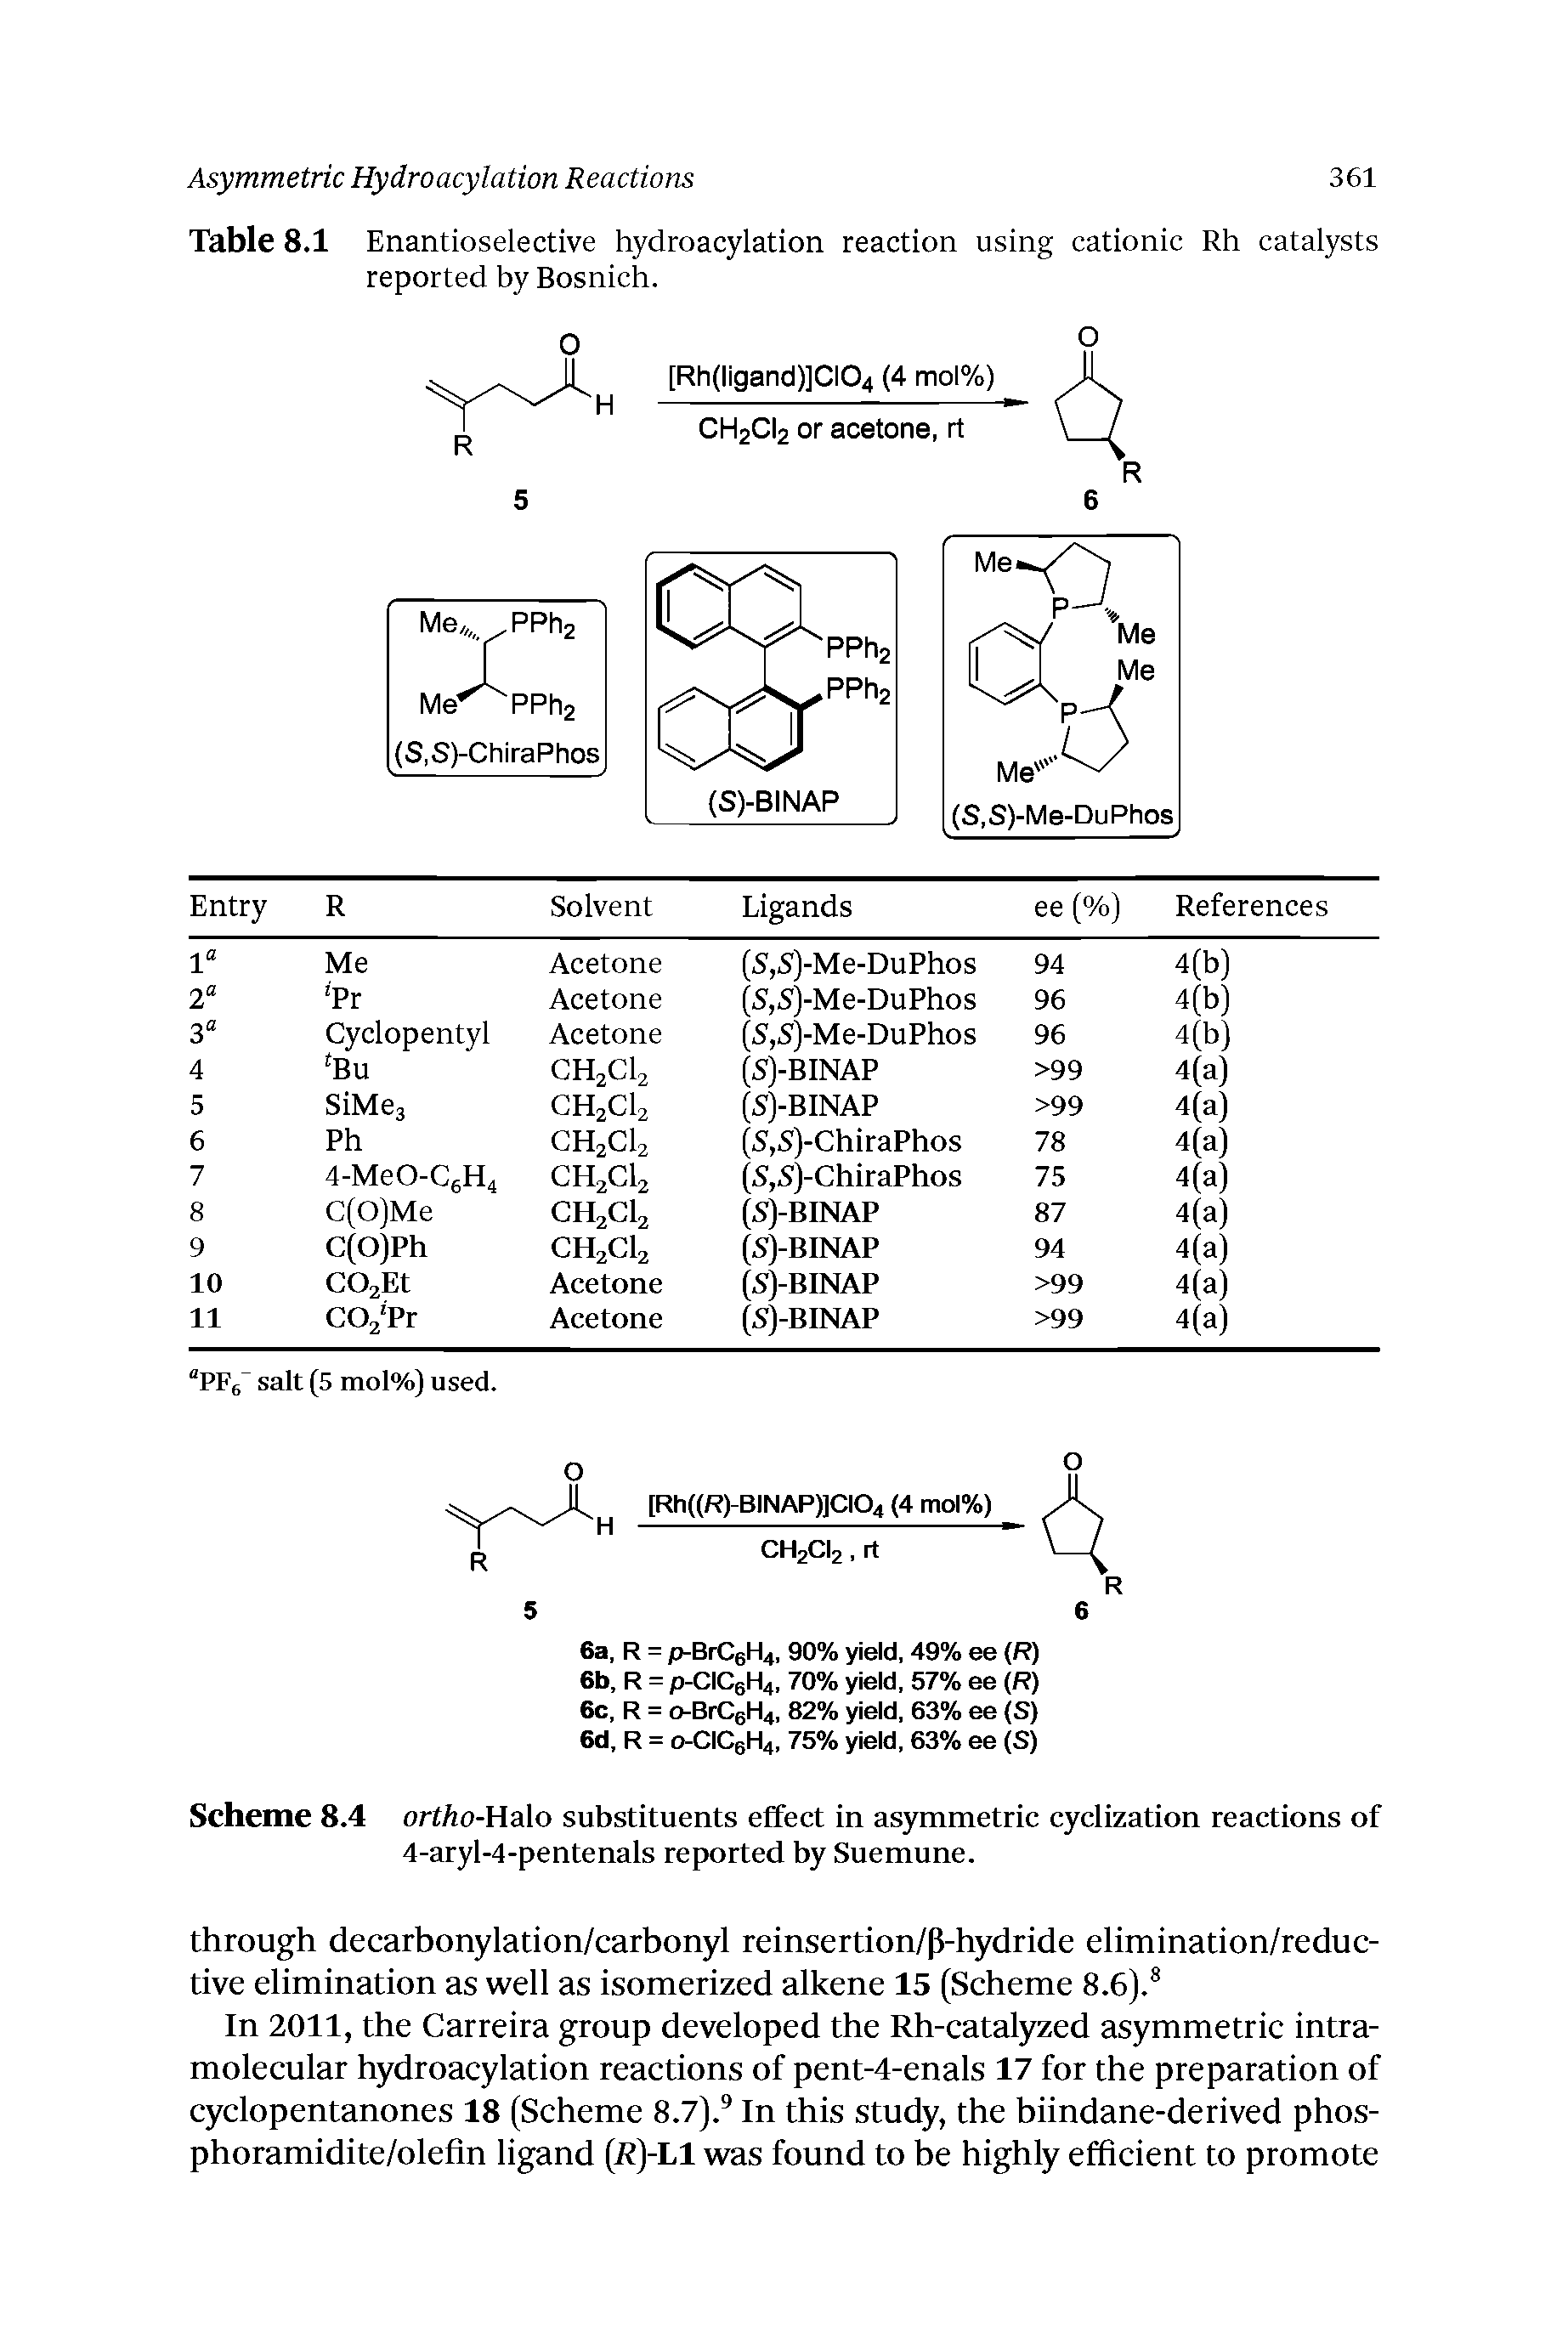 Table 8.1 Enantioselective hydroacylation reaction using cationic Rh catalysts reported by Bosnich.